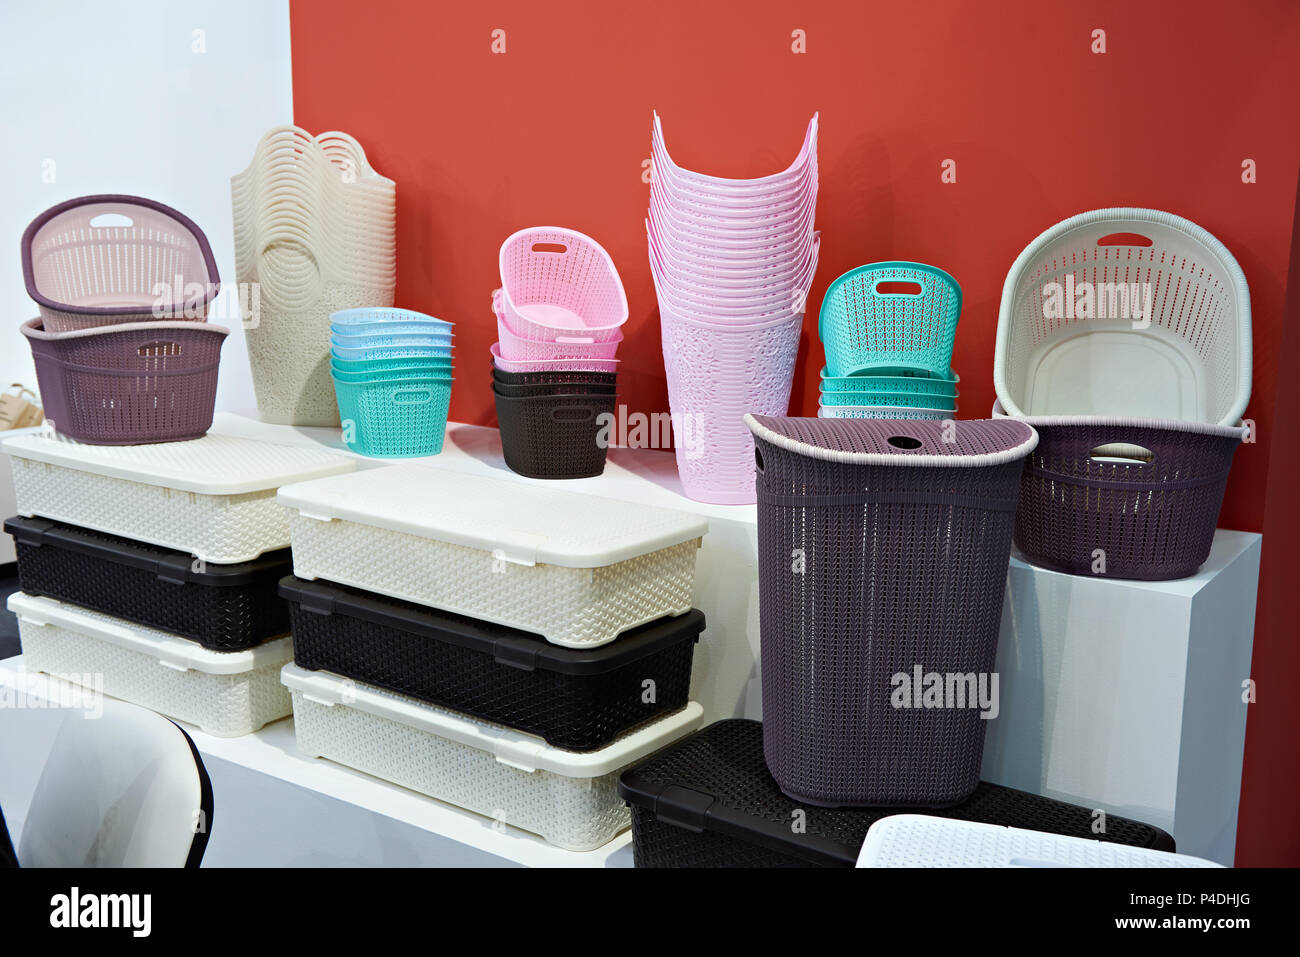 Plastic boxes, baskets and containers for storing household items Stock Photo